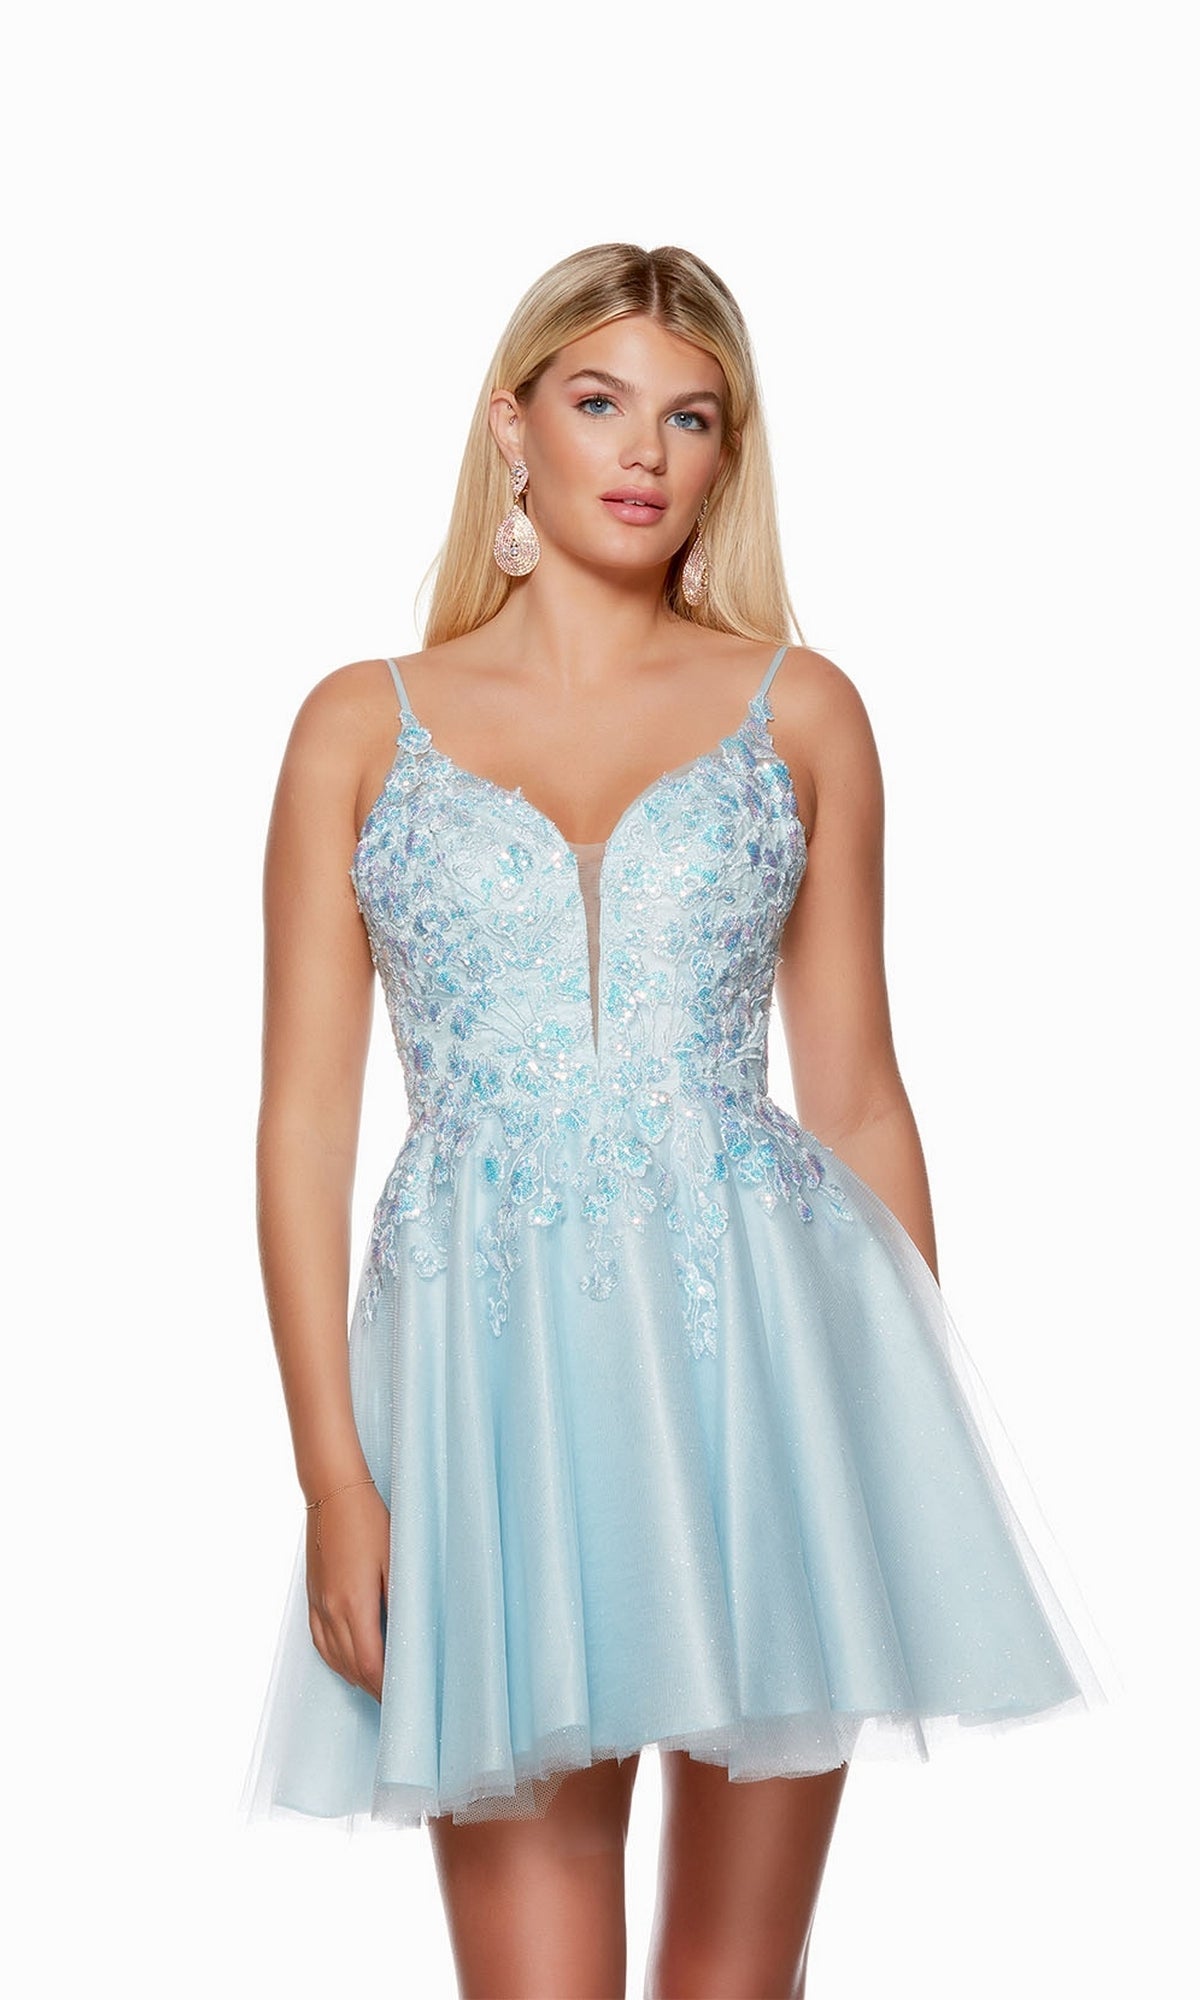 Light Blue Short Homecoming Dress By Alyce 3132